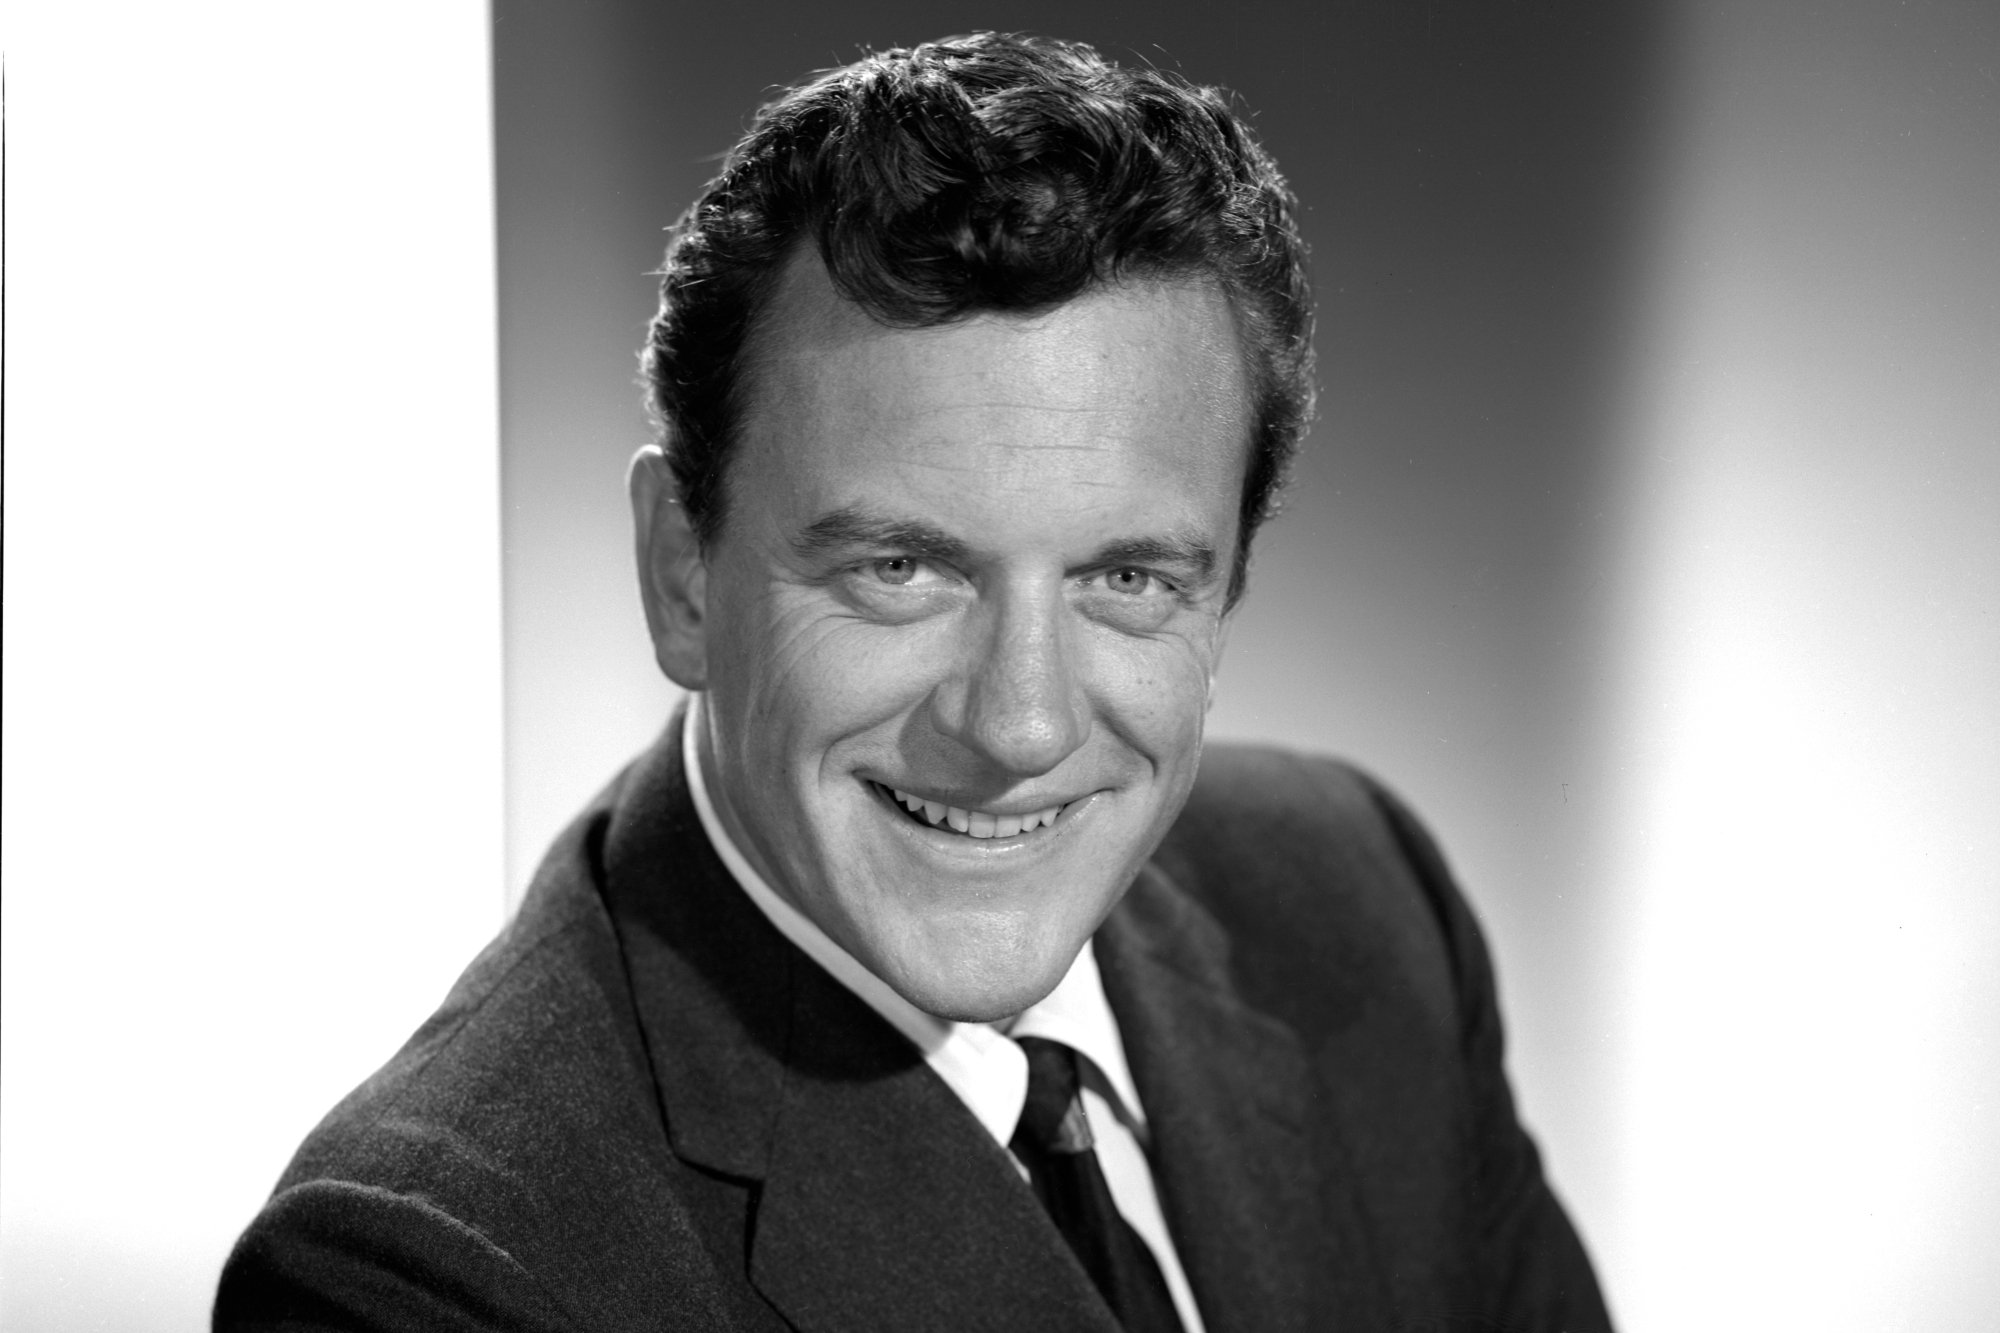 'Gunsmoke' actor James Arness smiling in a black-and-white promo image wearing a suit and tie